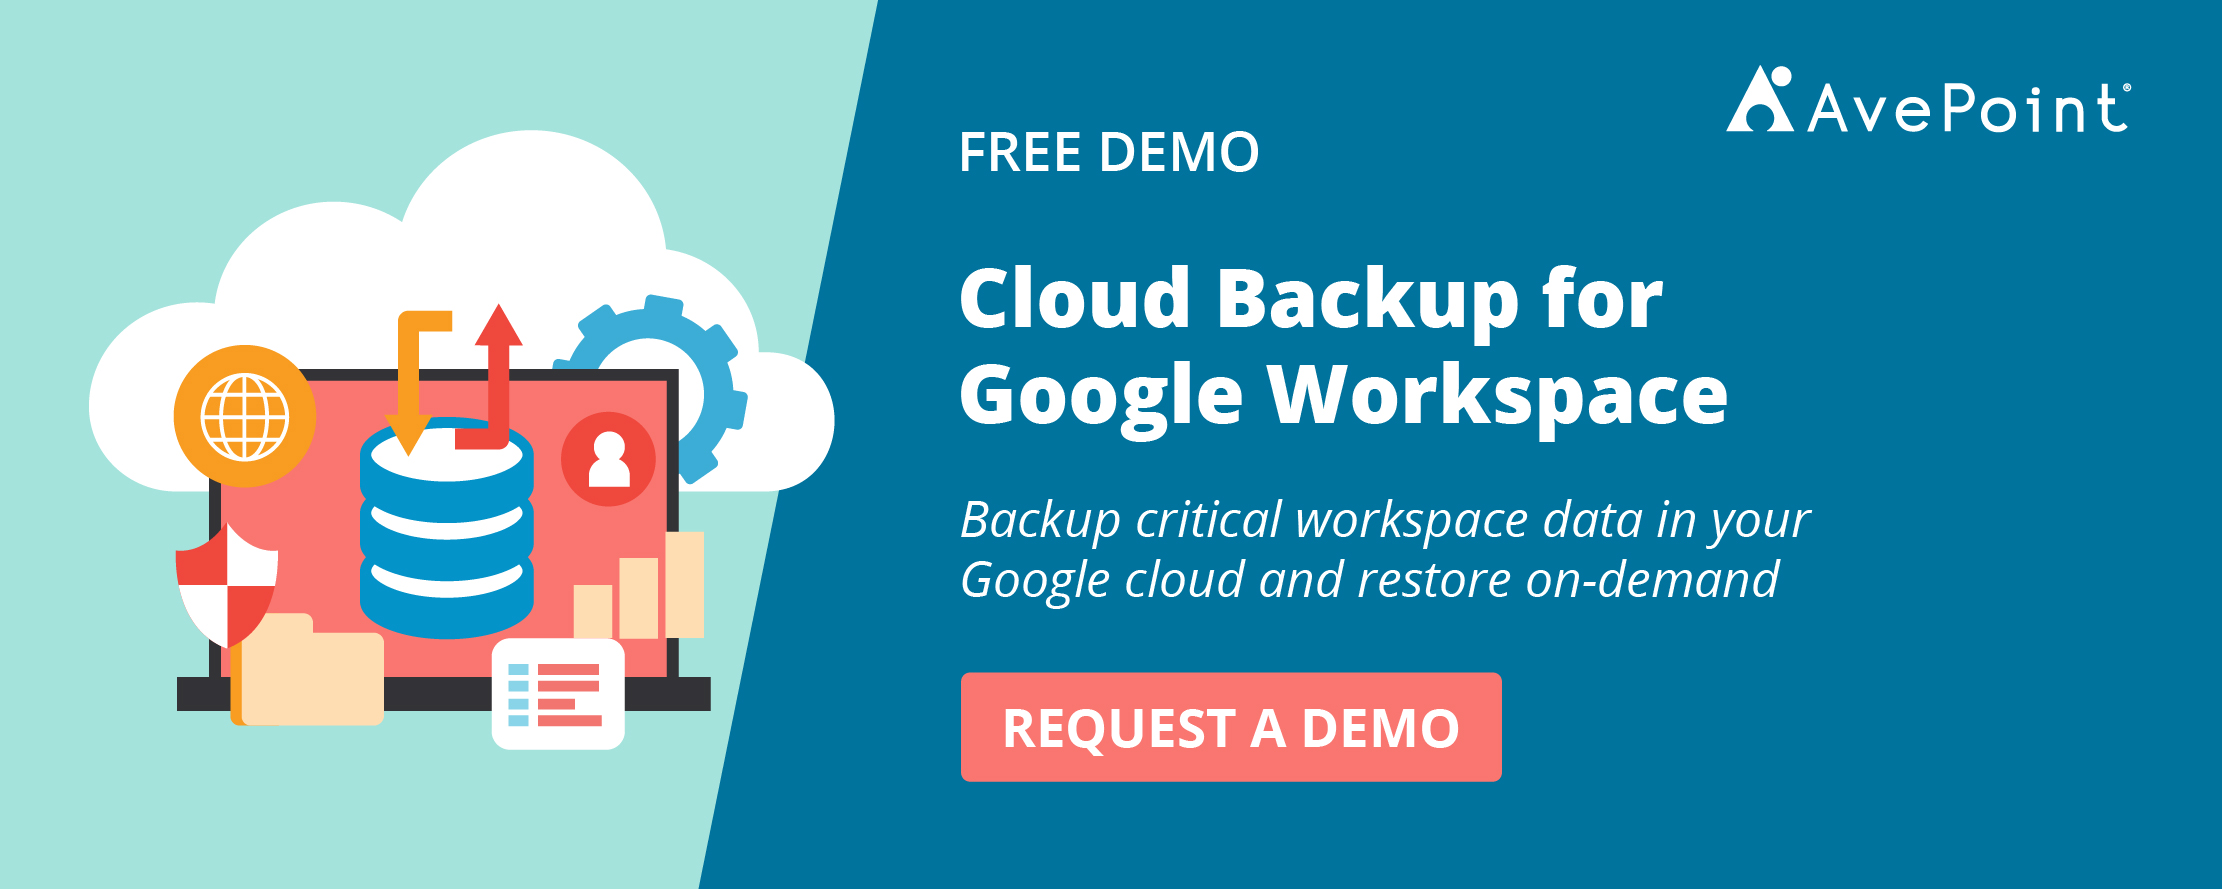 avepoint-cloud-backup-for-google-workspace